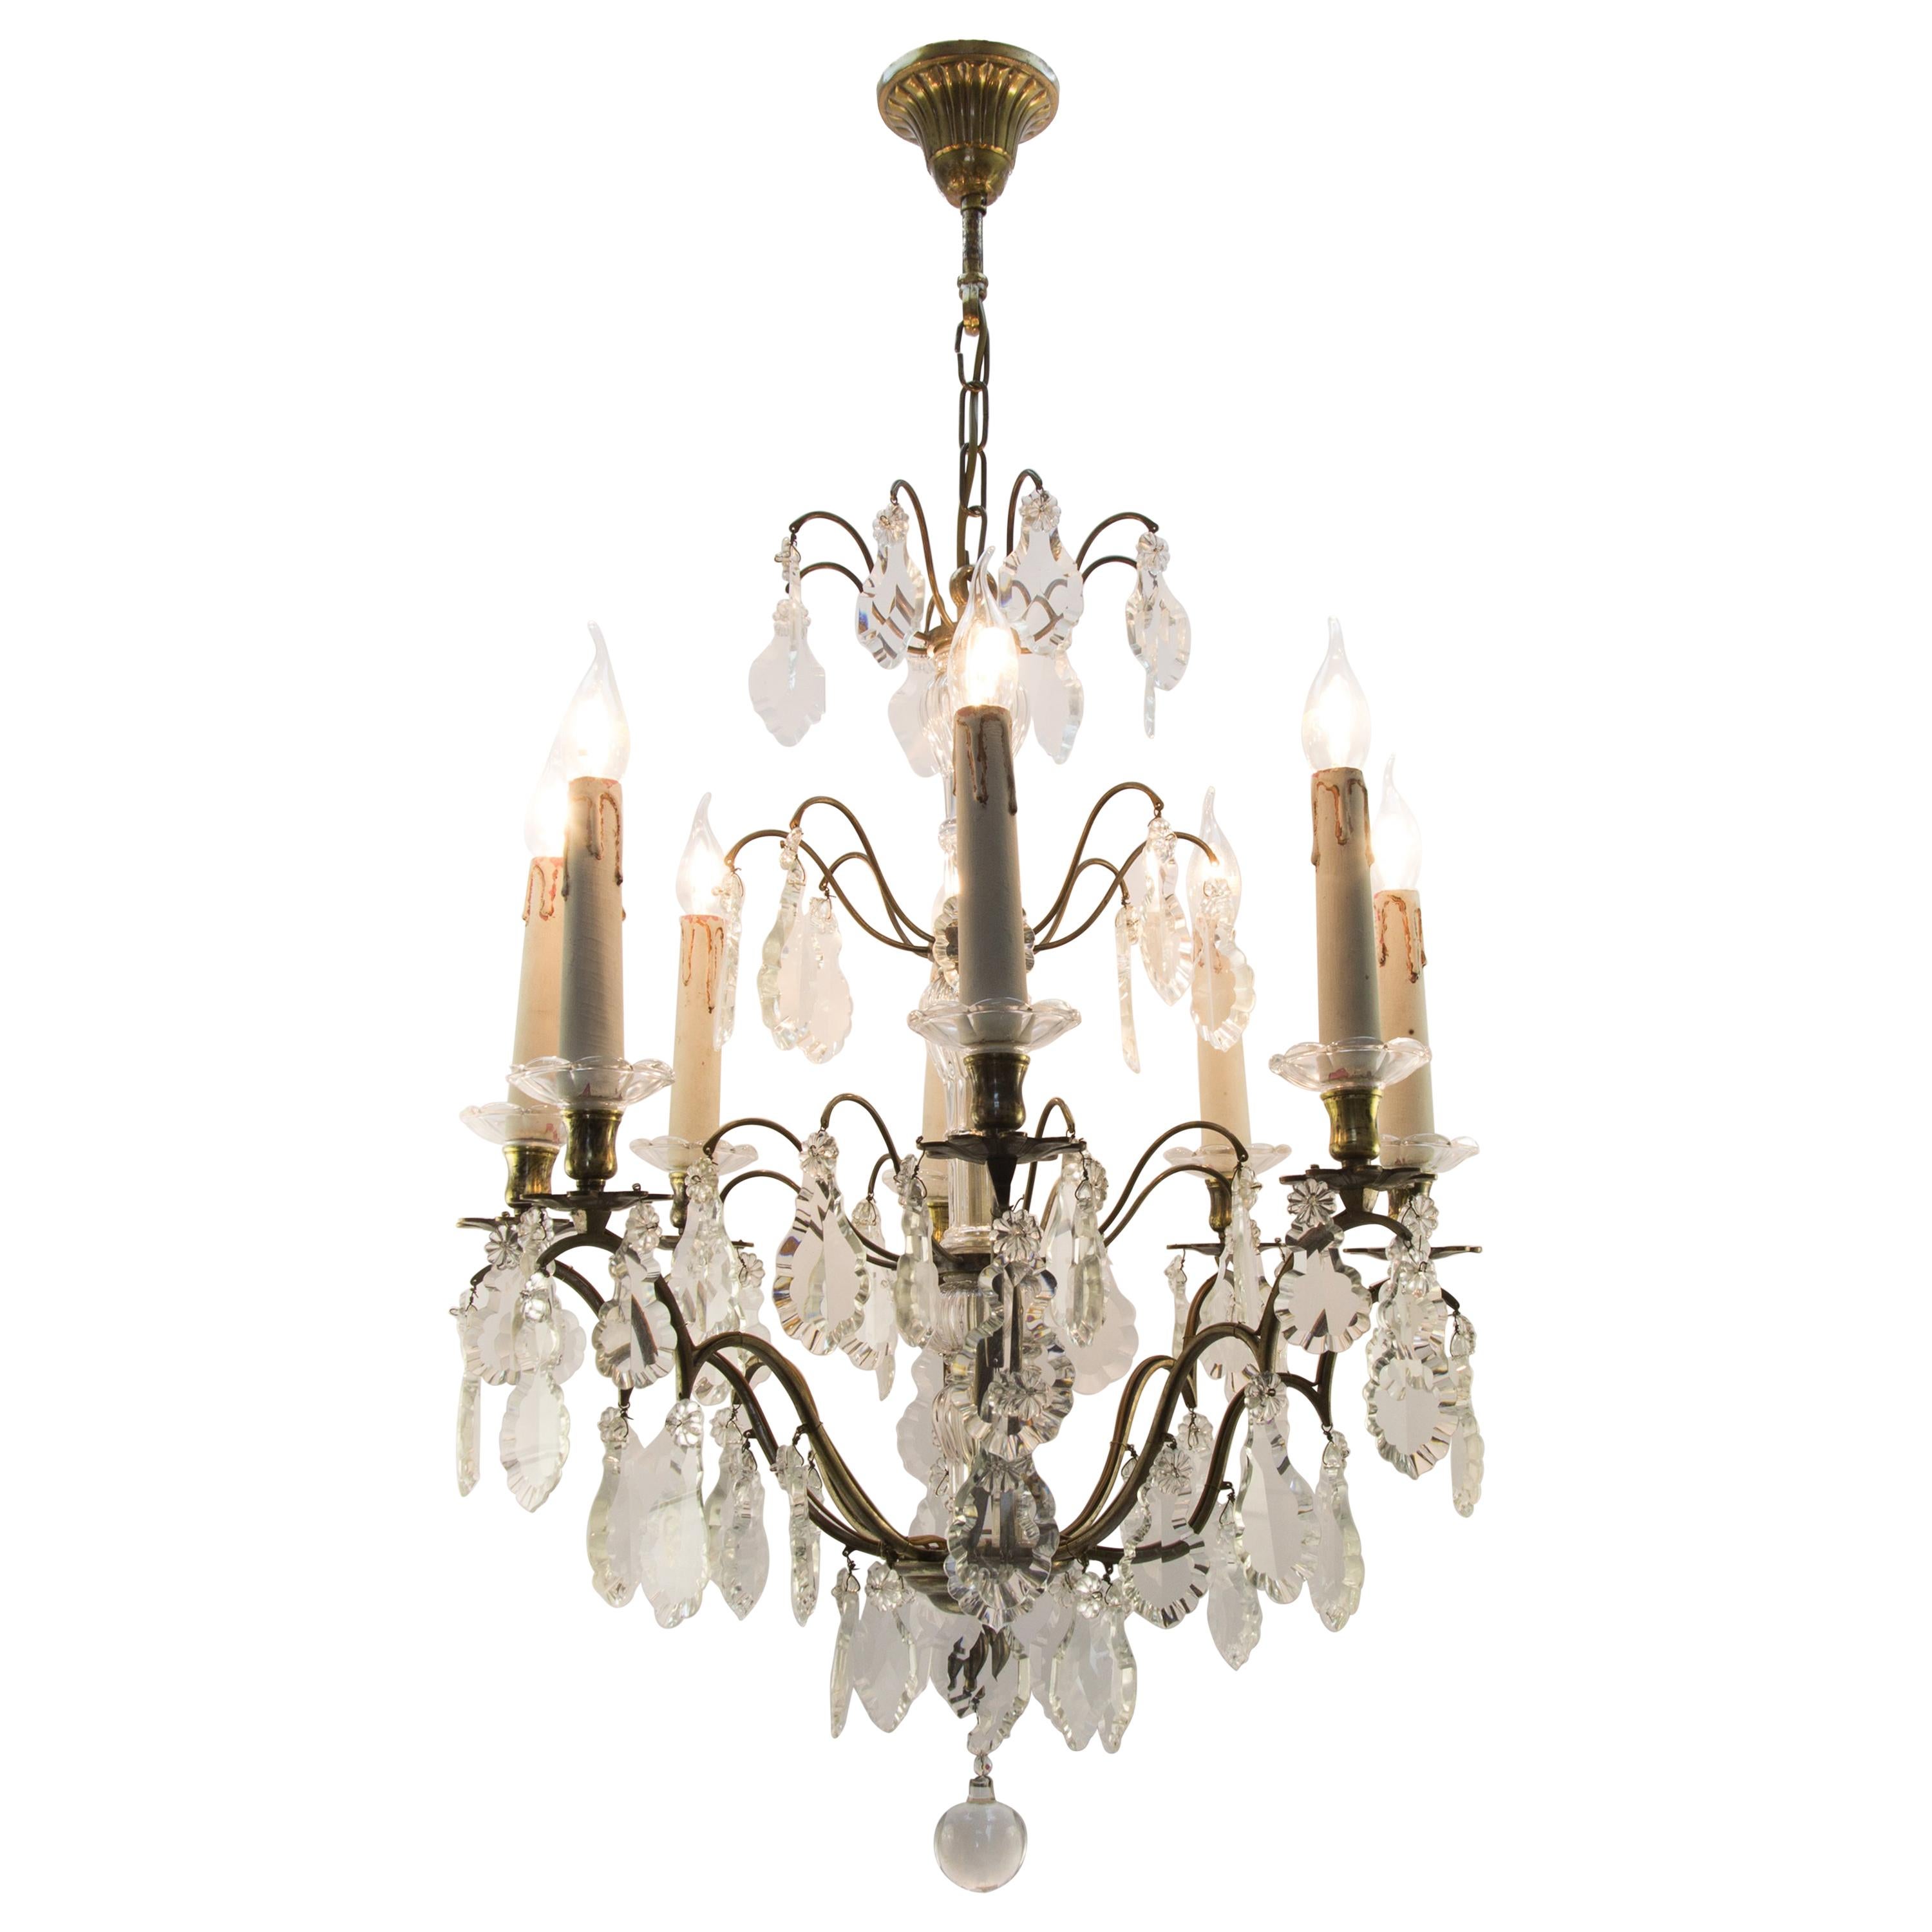 19th Century French Eight–Light Crystal and Bronze Chandelier